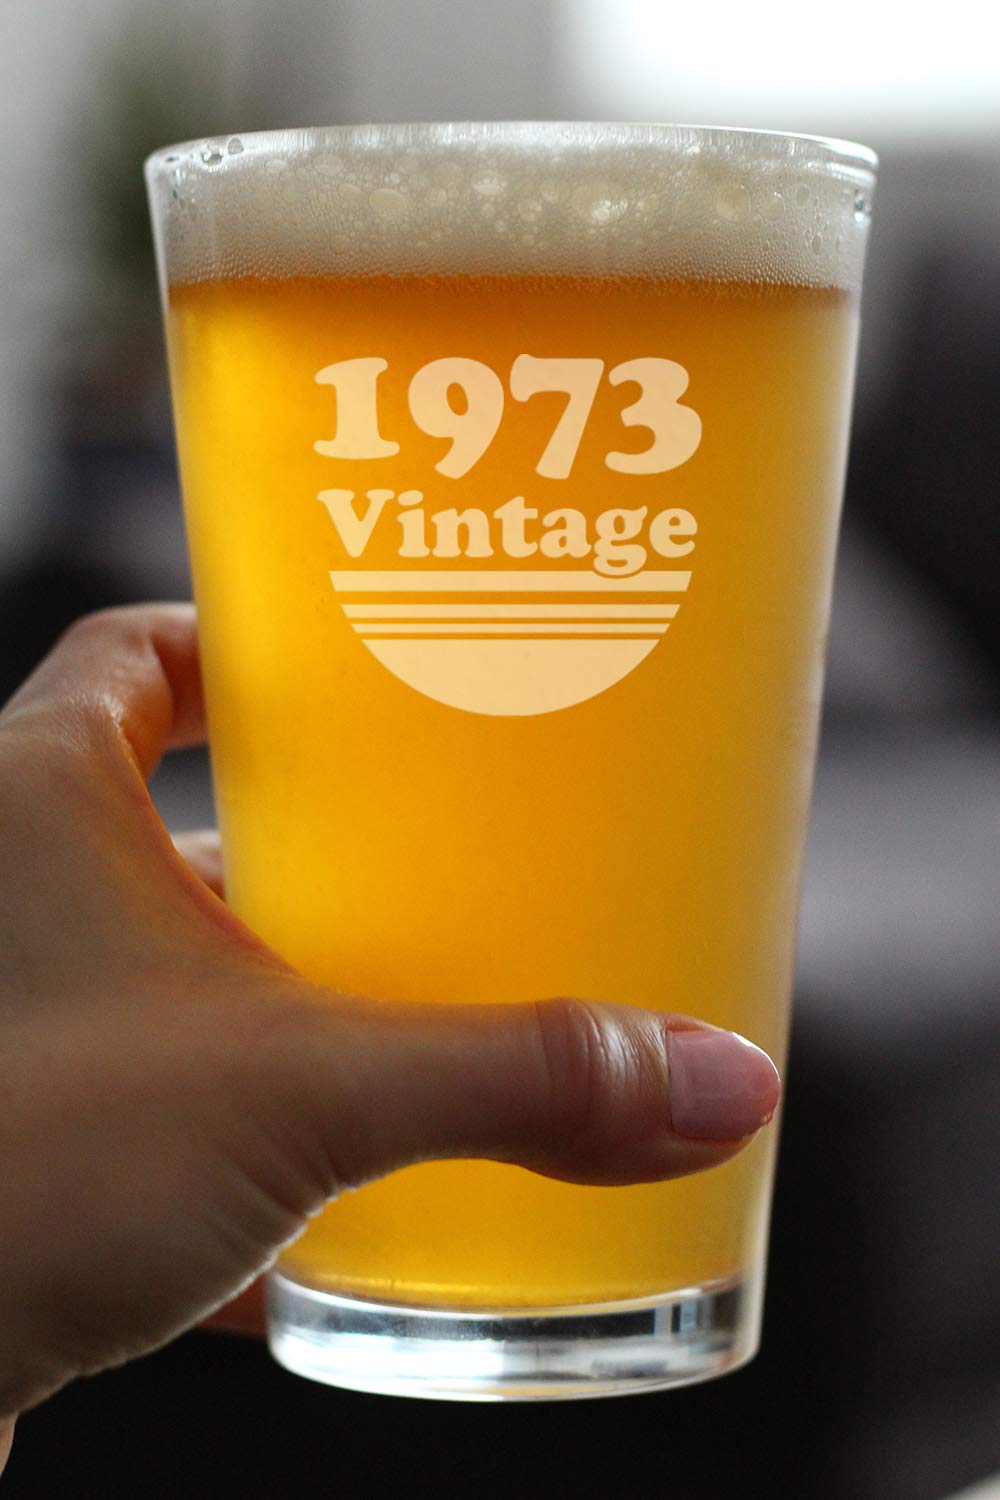 Vintage 1973 - Pint Glass for Beer - 51st Birthday Gifts for Men or Women Turning 51 - Fun Bday Party Decor - 16 oz